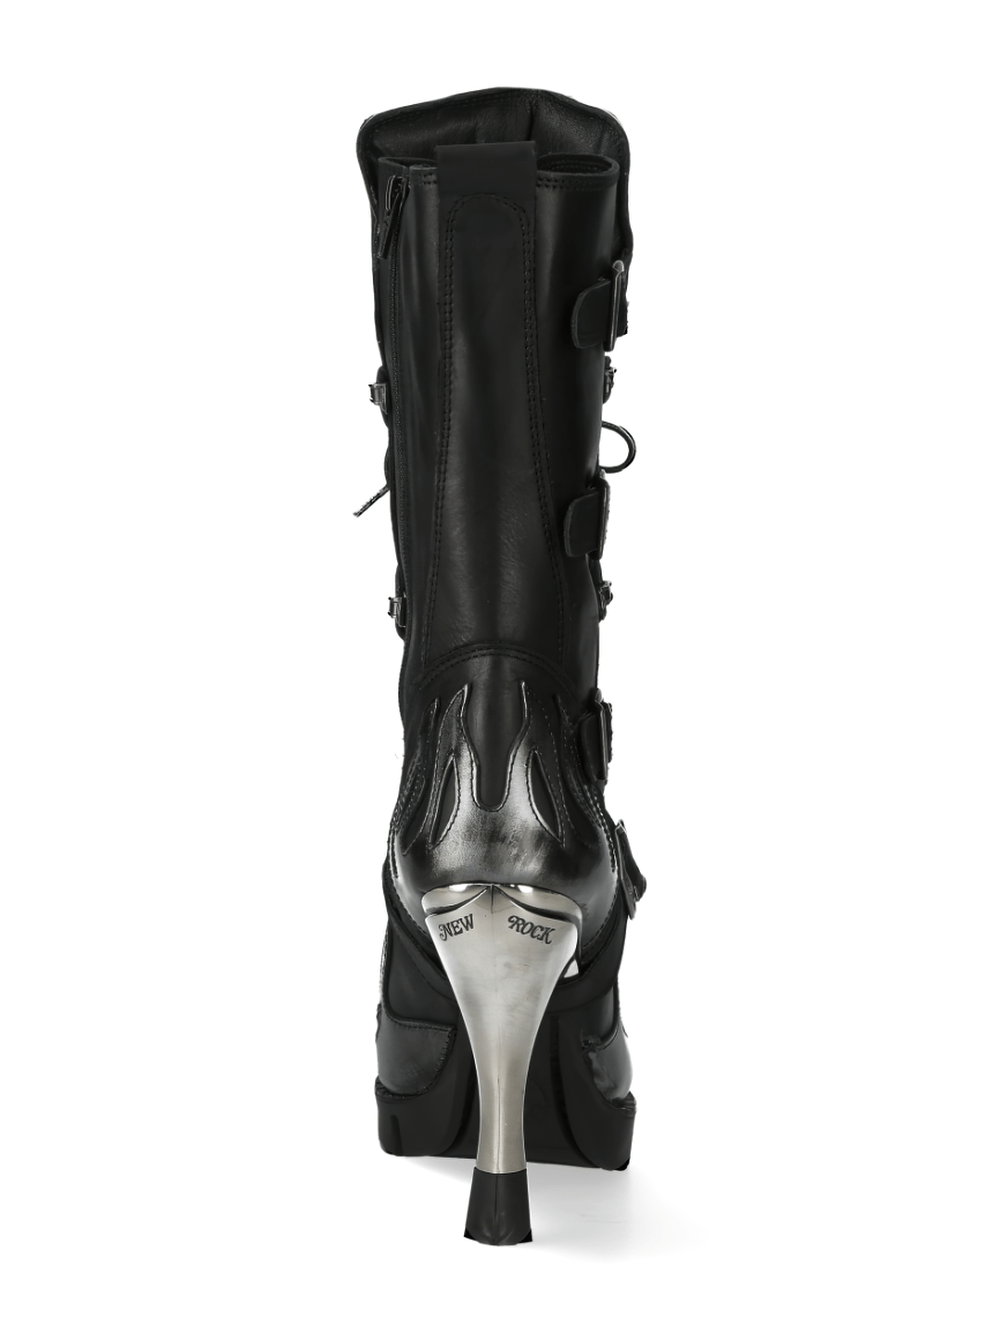 NEW ROCK Flame Accented Heeled Boots with Metallic Touch